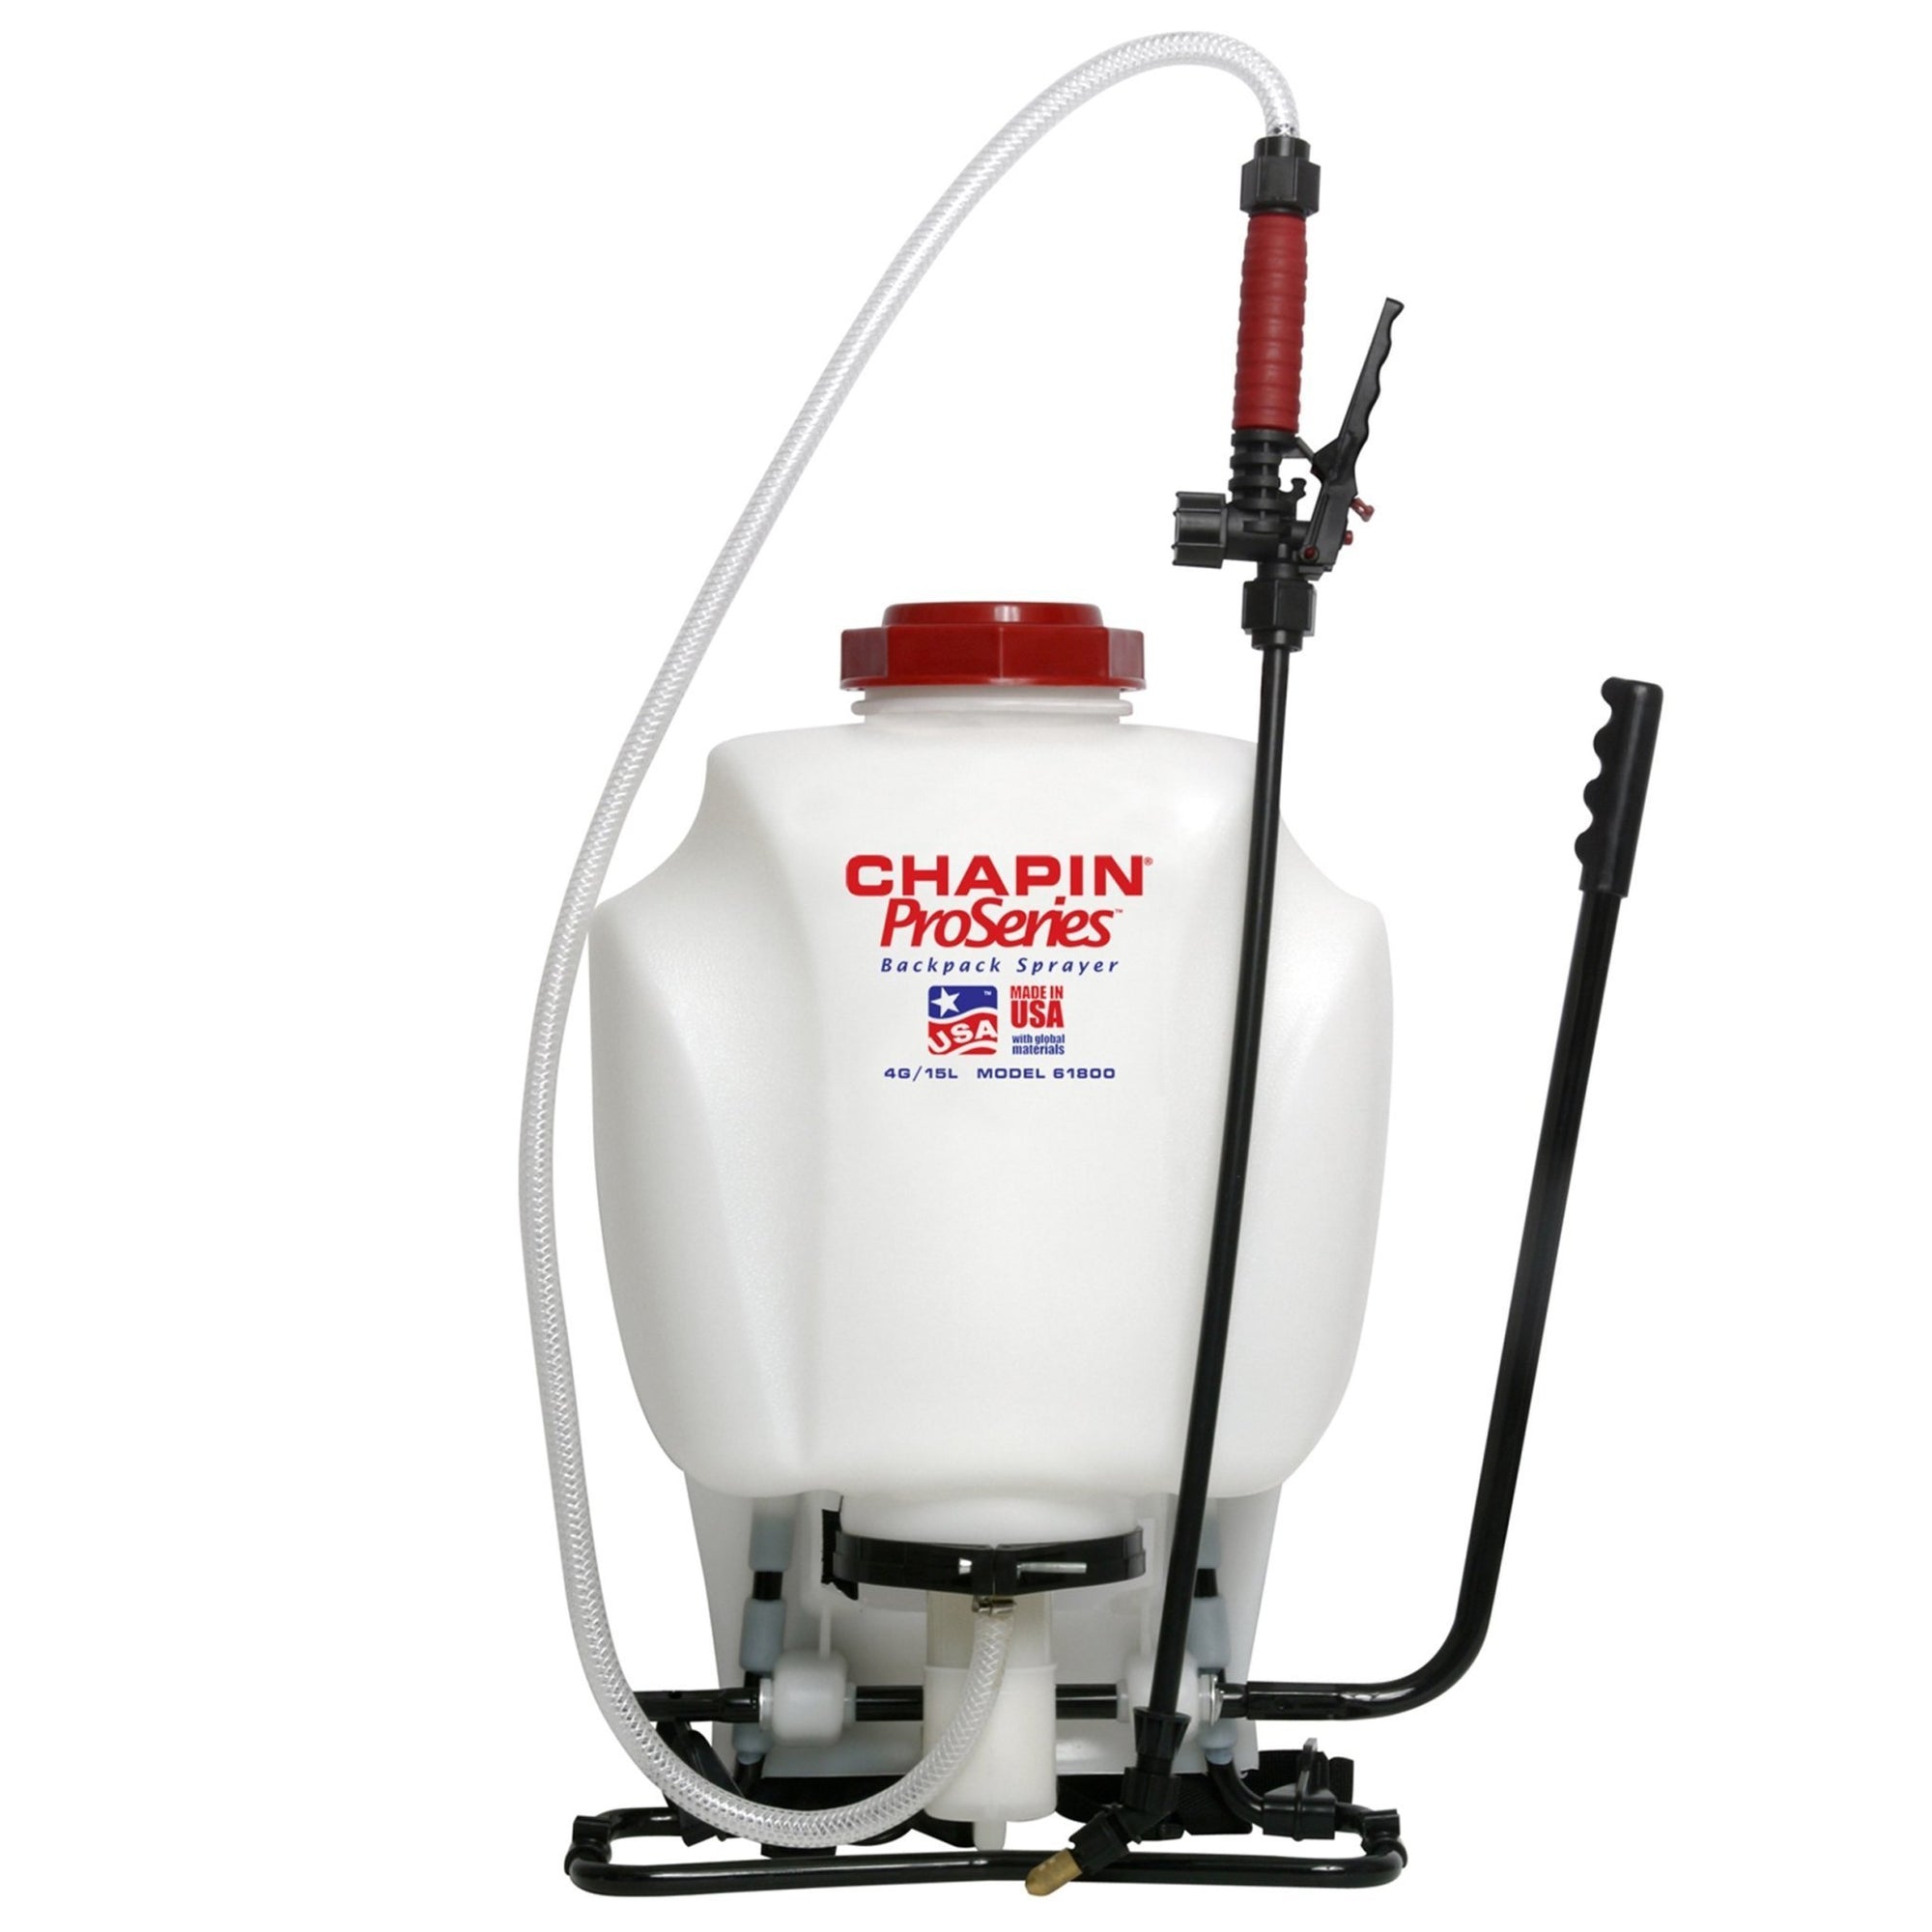 4 gallon pro series sprayer, available at Aboff's in New York and Long Island.